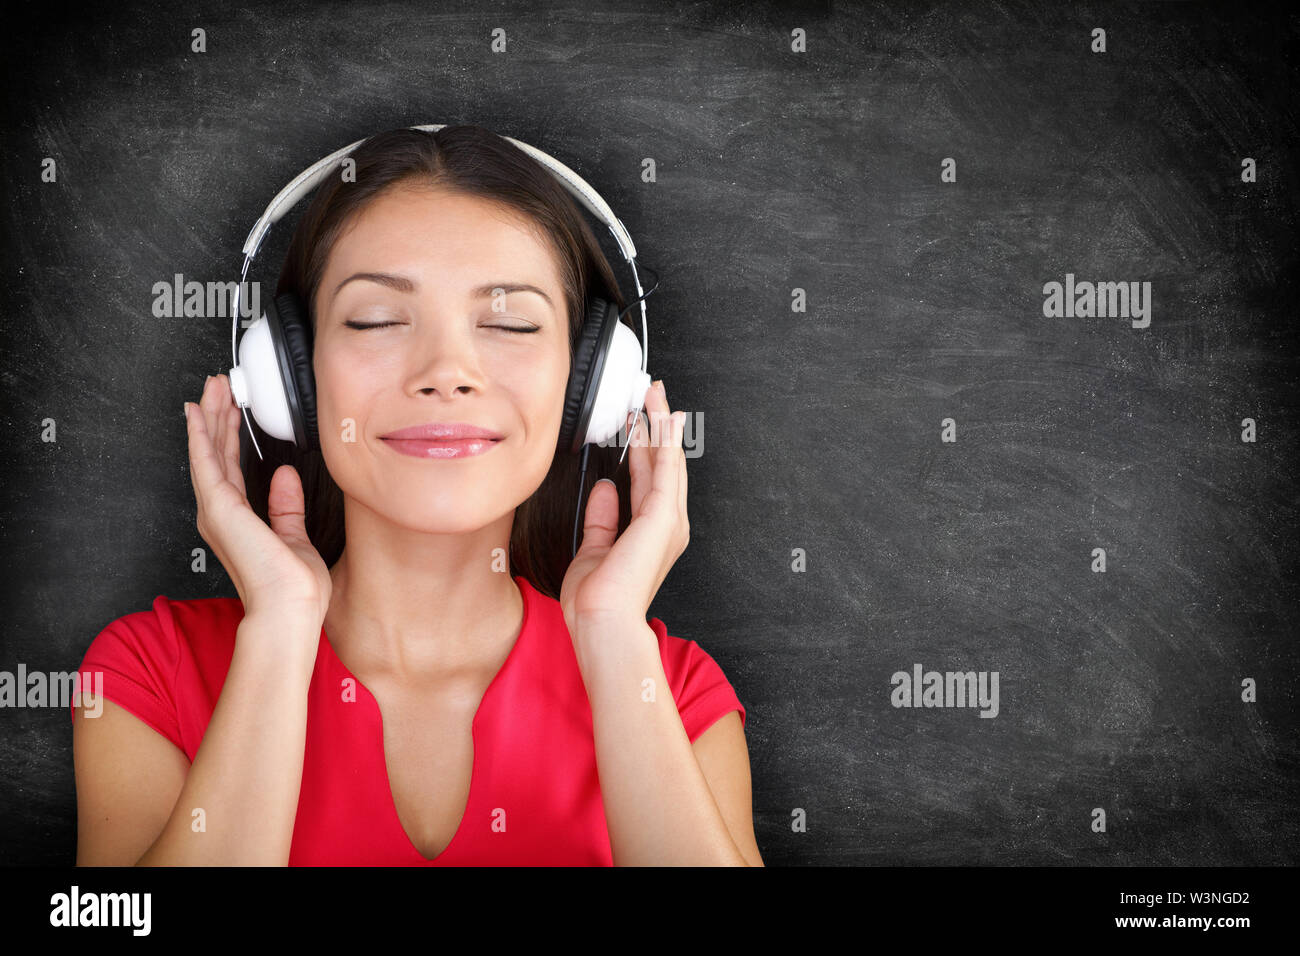 Music in headphones. Beautiful young Asian woman with her eyes closed in bliss listening to music wearing a set of headphones and standing against black blackboard background with copyspace Stock Photo